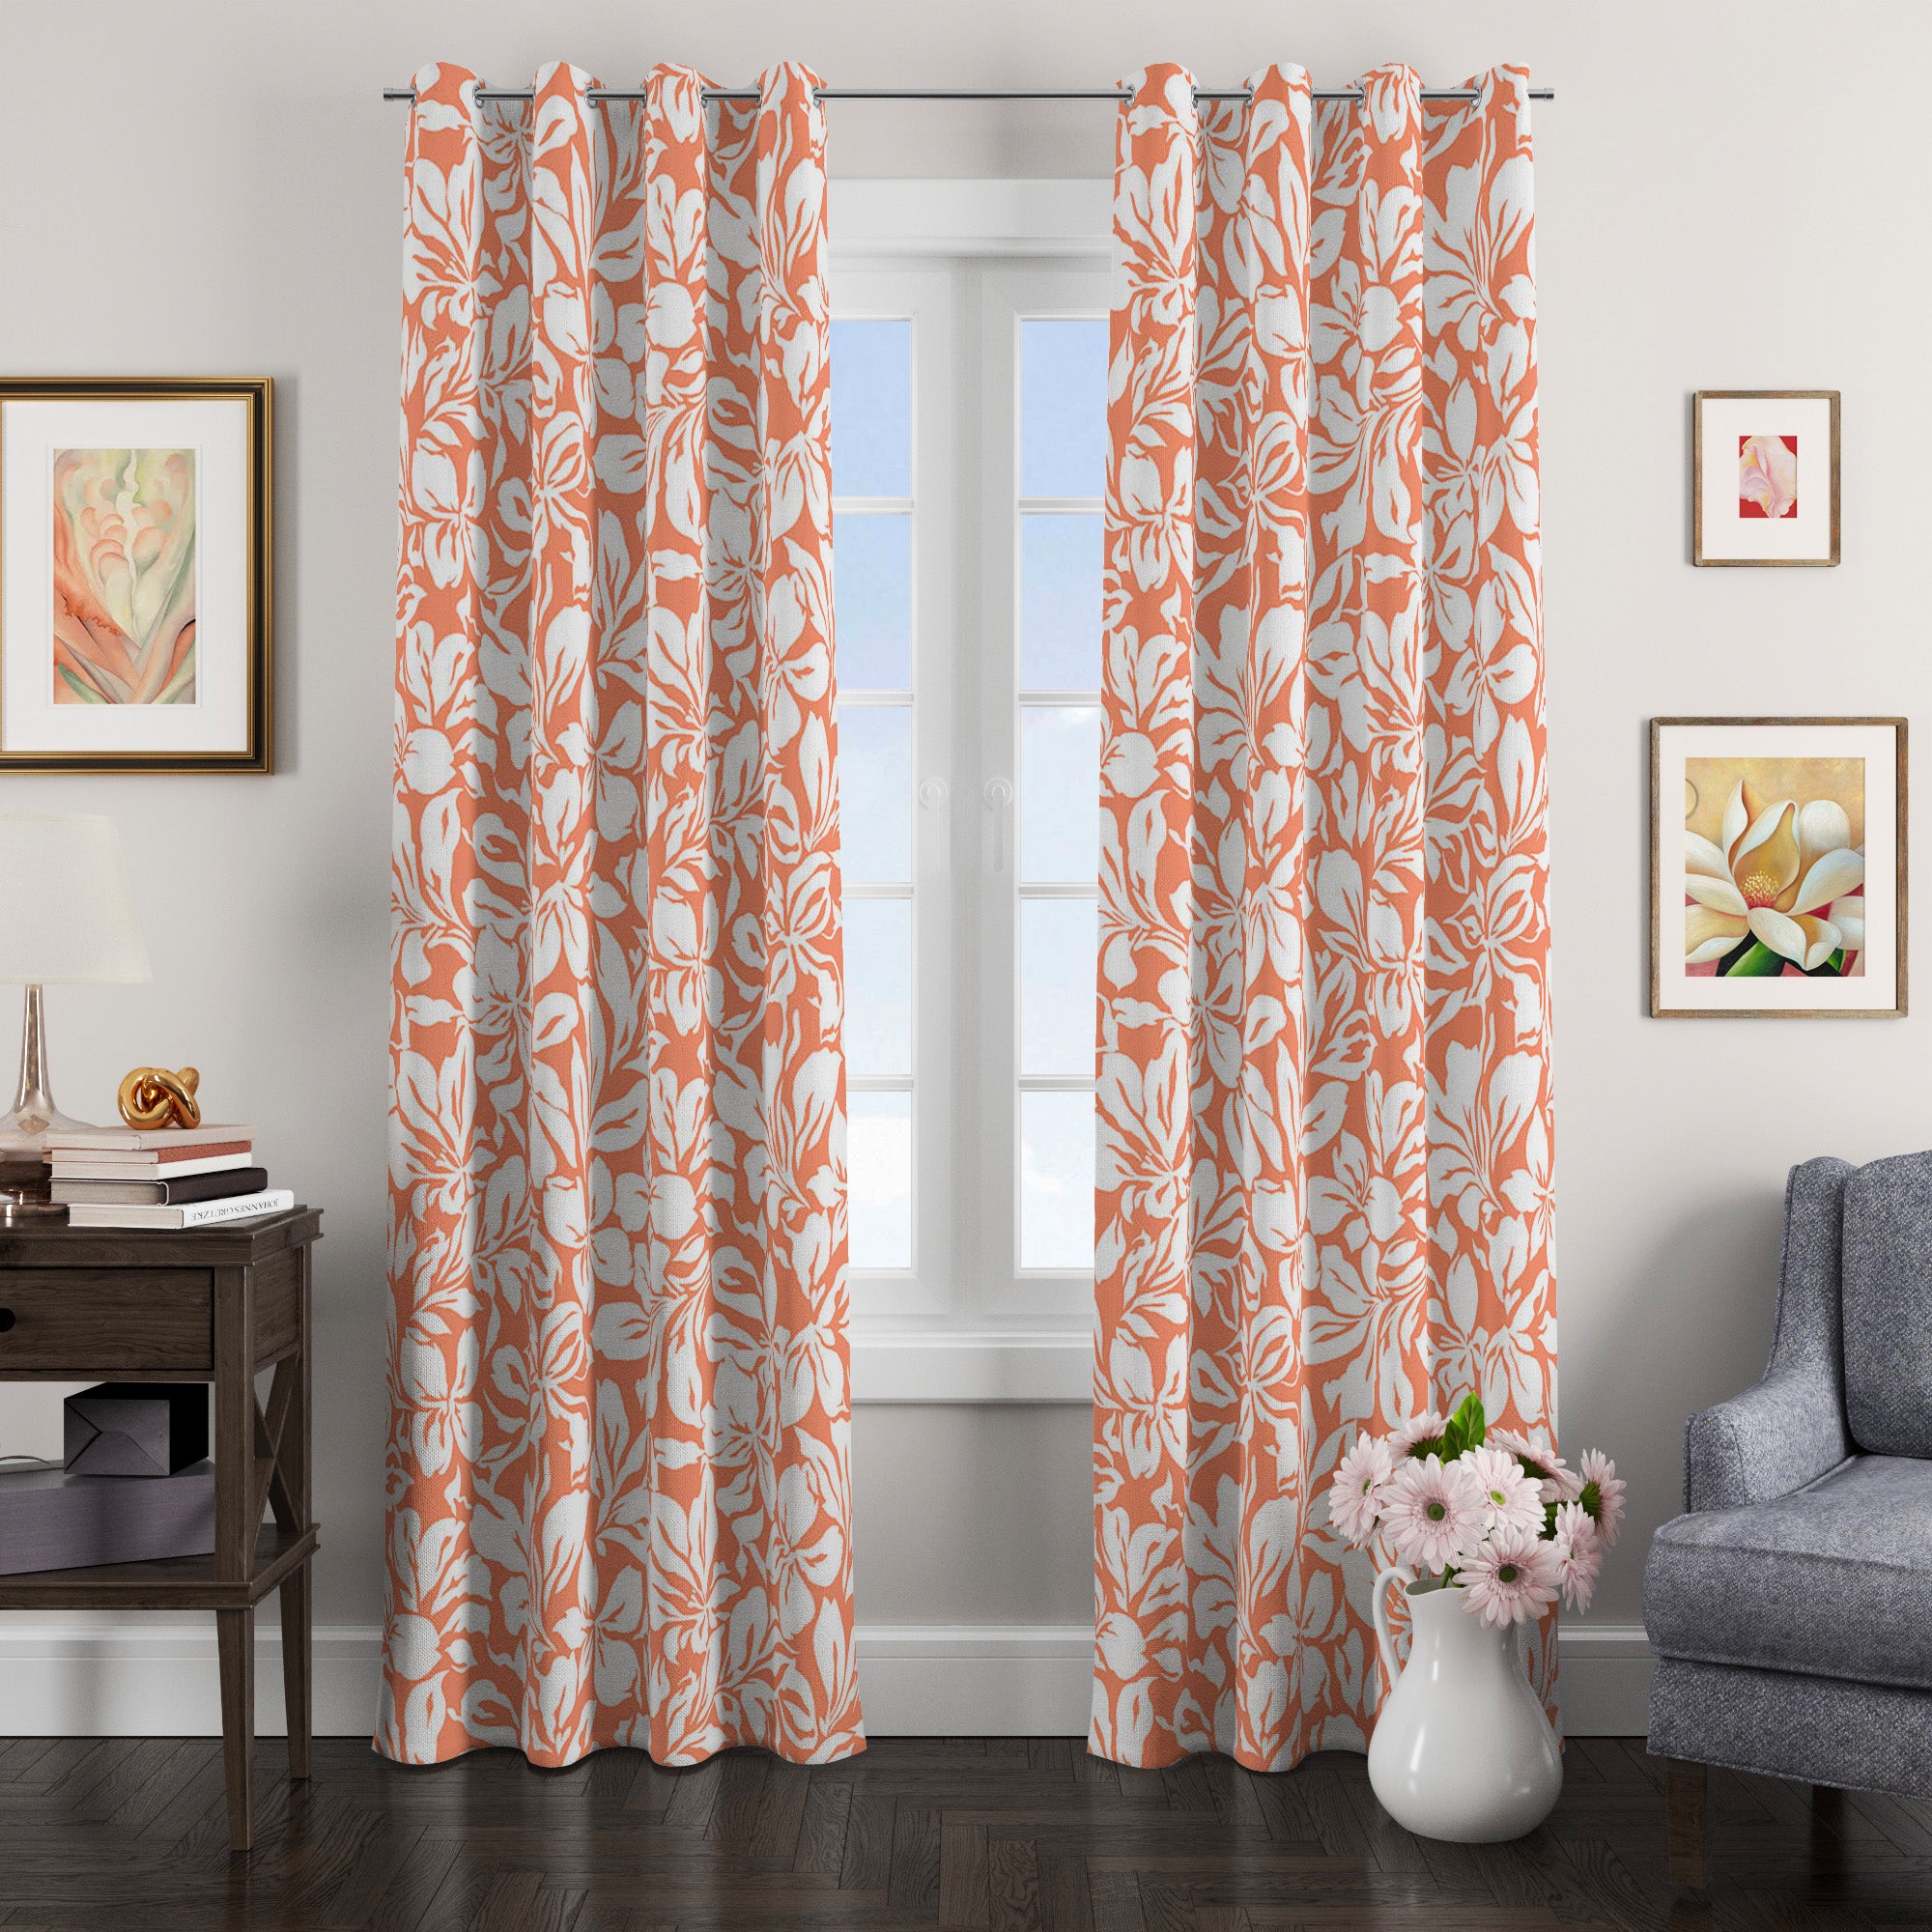 Abstract White Flowers Damask Peach Pink Fl Blackout Window Curtai Shapes Decor